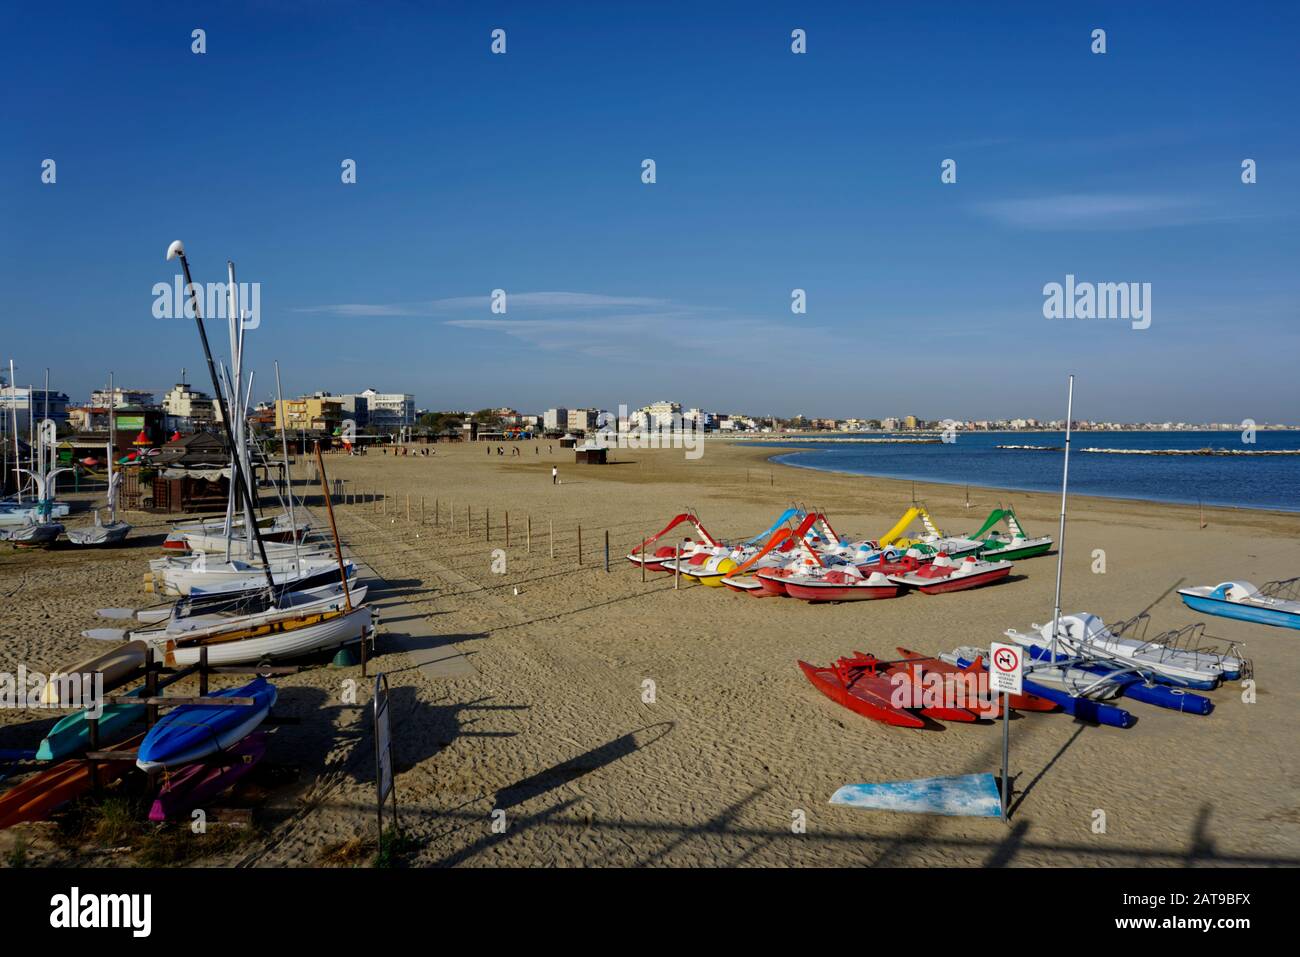 Rimini, Italy - October 21, 2019: View of seafront with yachts, boats, pedalos and canoes on the beach and buildings in the background. Stock Photo